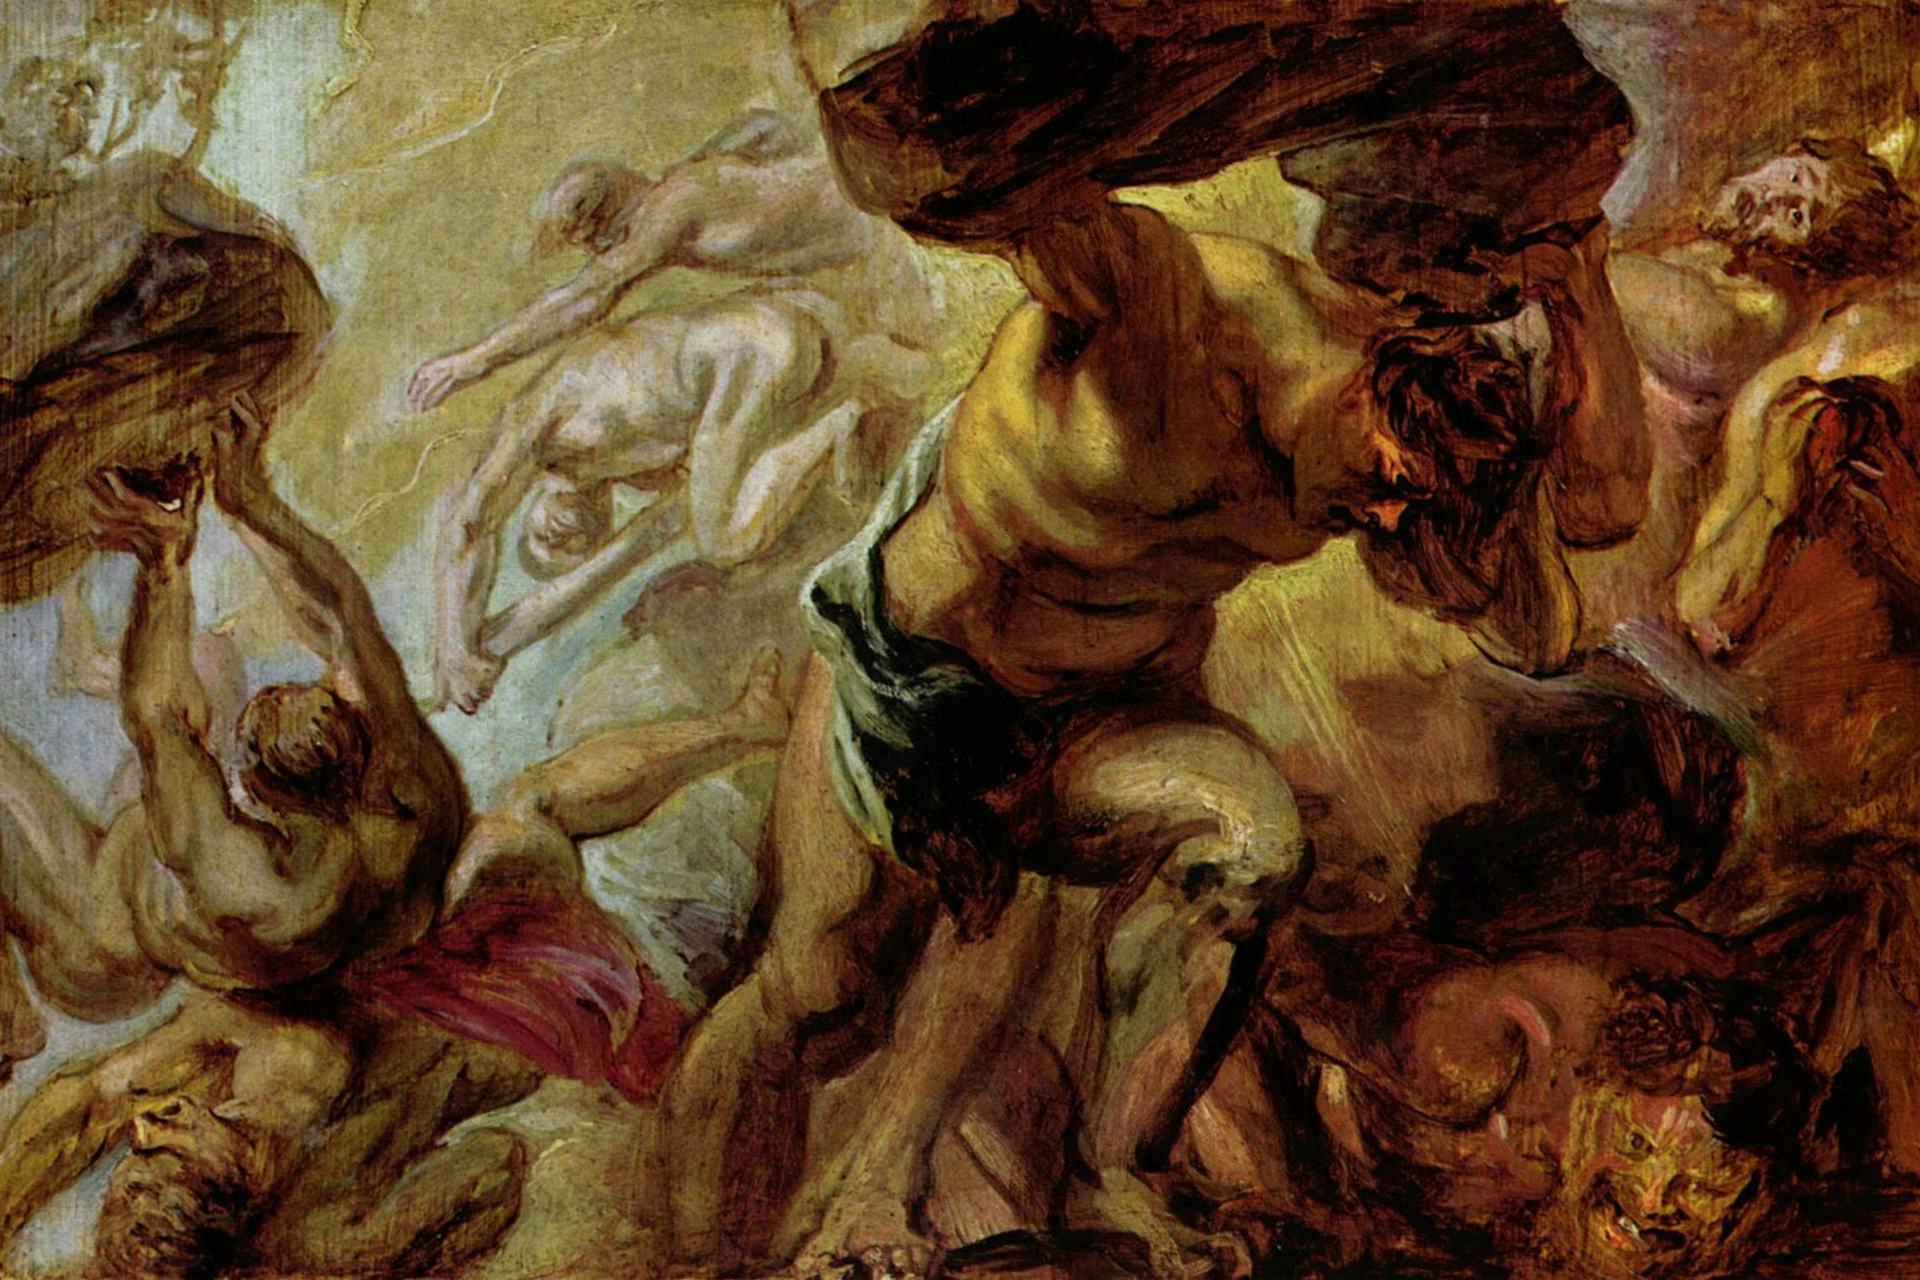 Fall of the Titans by Peter Paul Rubens (ca. 1637-1638)